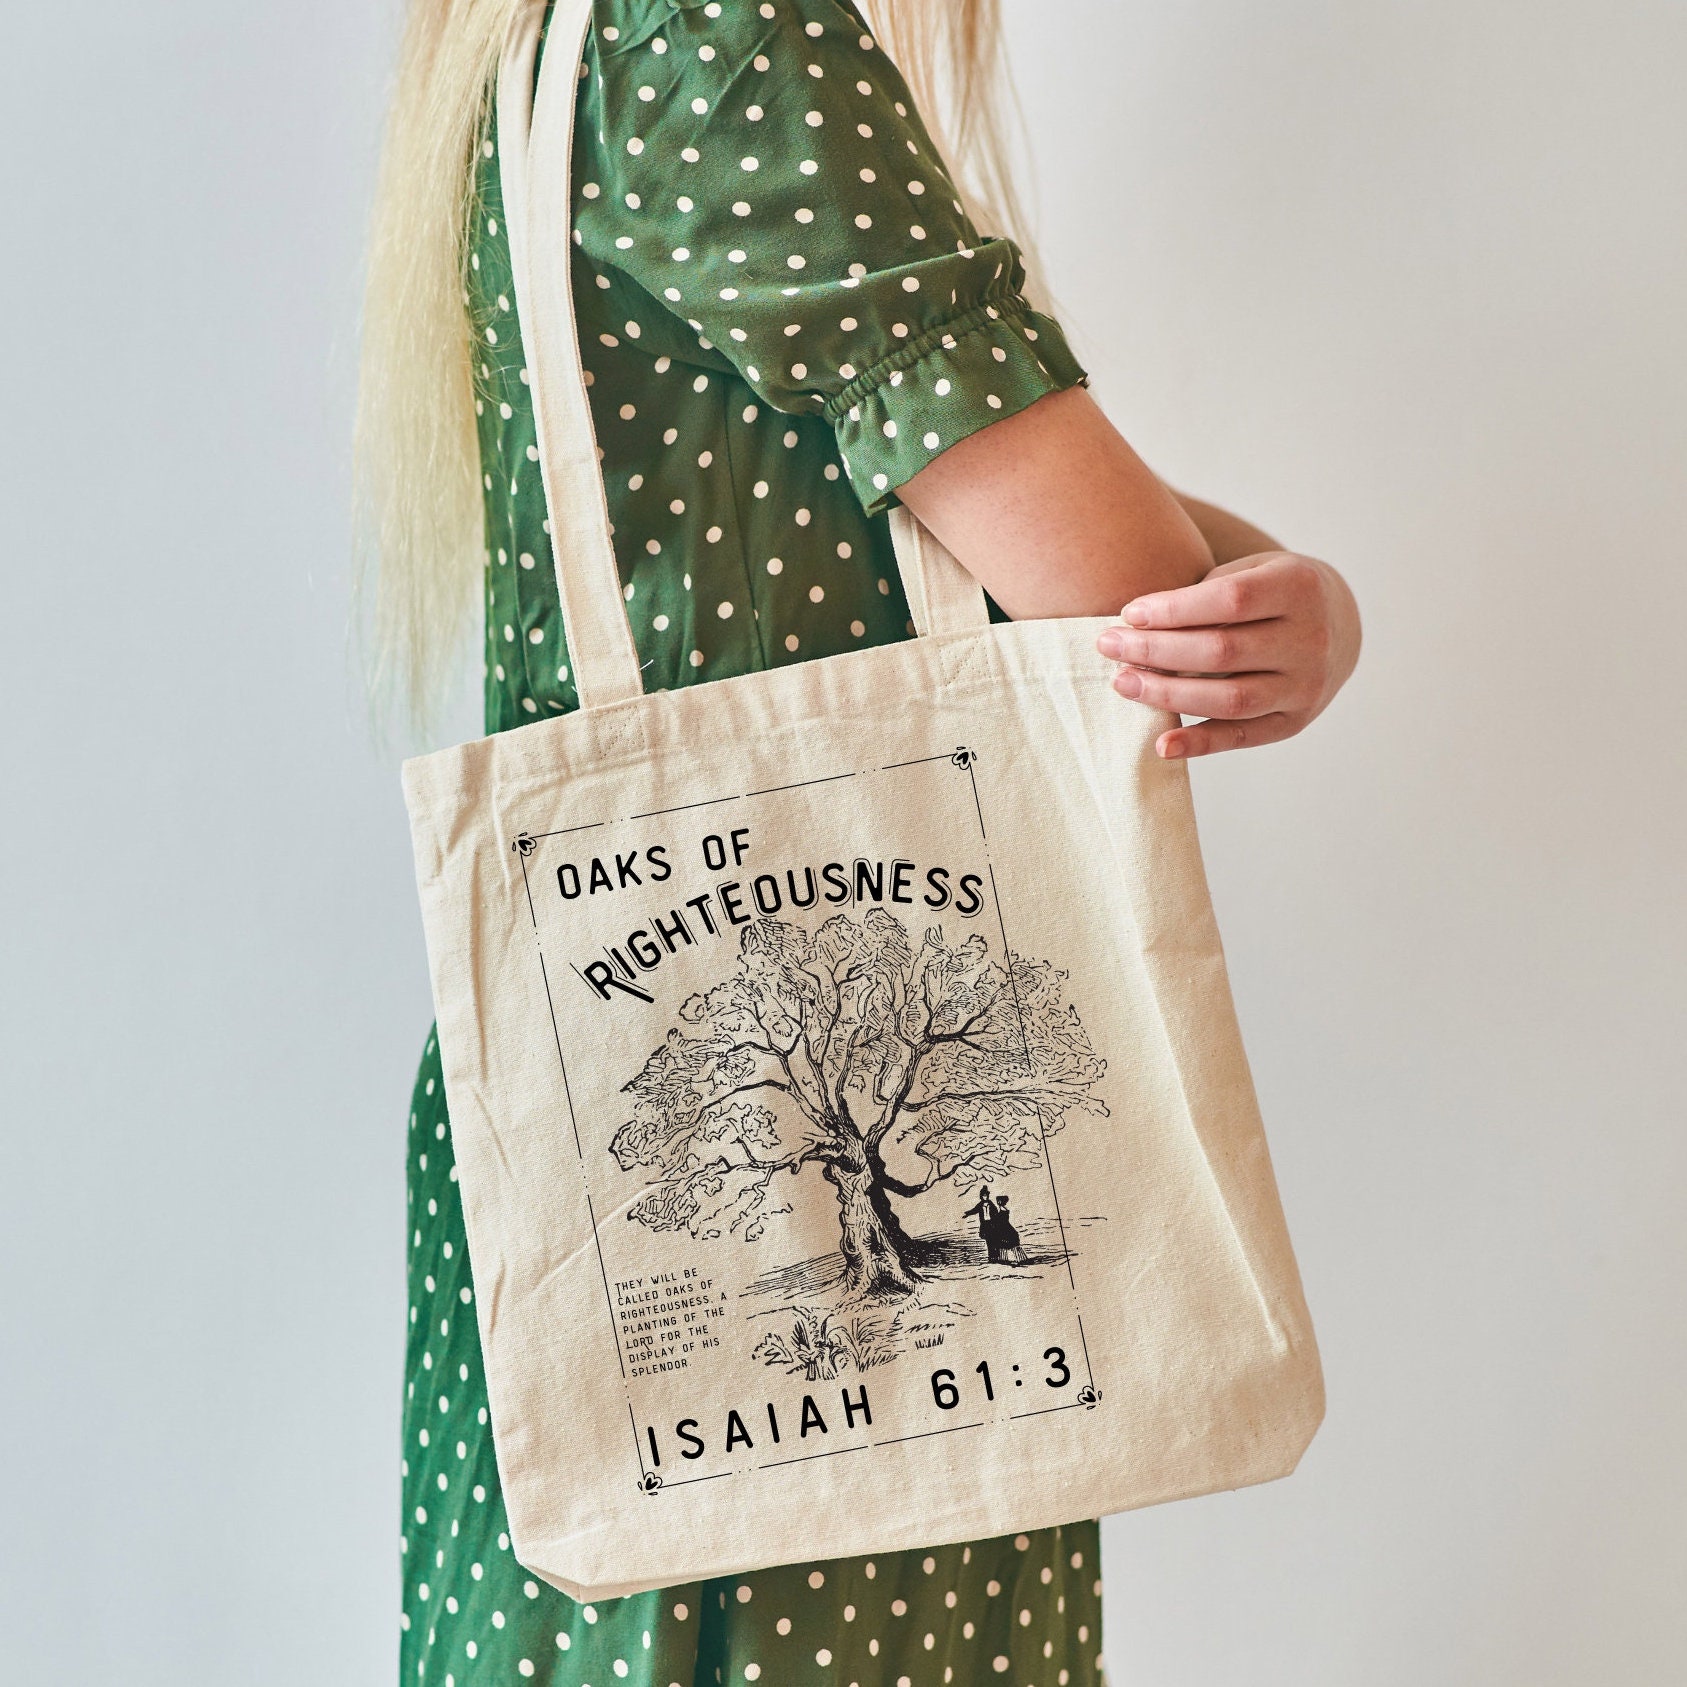 Christian Tote Bag, Tote Bags for Women, Christian Tote Bags, Christian  Gifts for Women, Religious Gifts, Christian Gift, for Mom or Teacher 